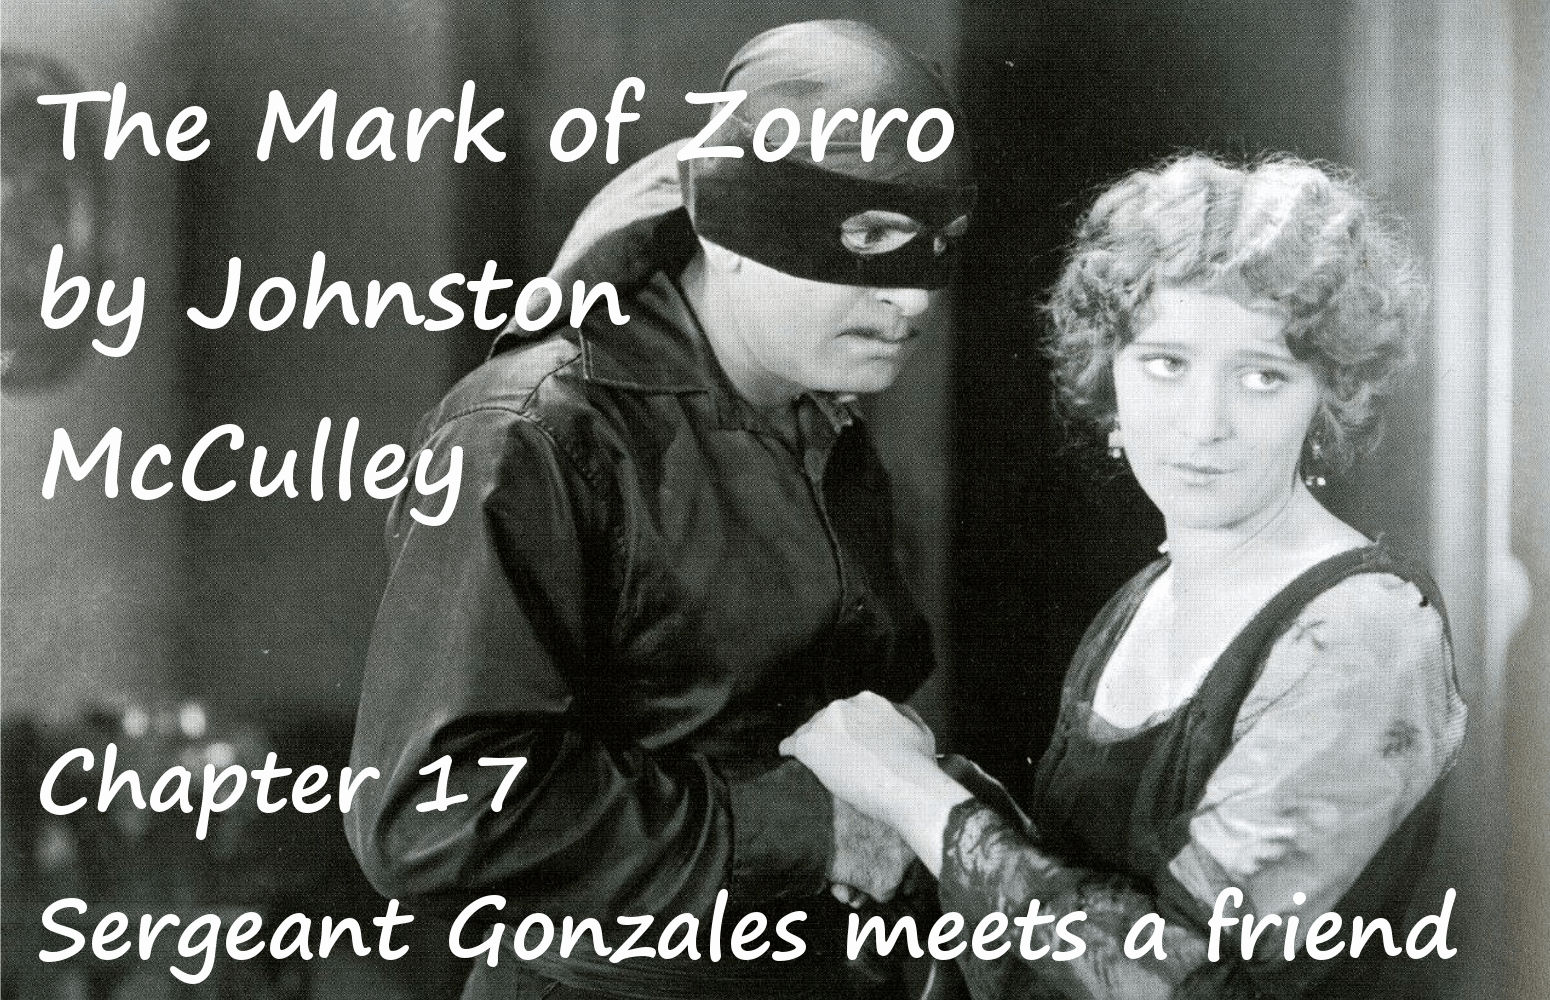 The Mark of Zorro chapter 17 Sergeant Gonzales meets a friend by Johnston McCulley